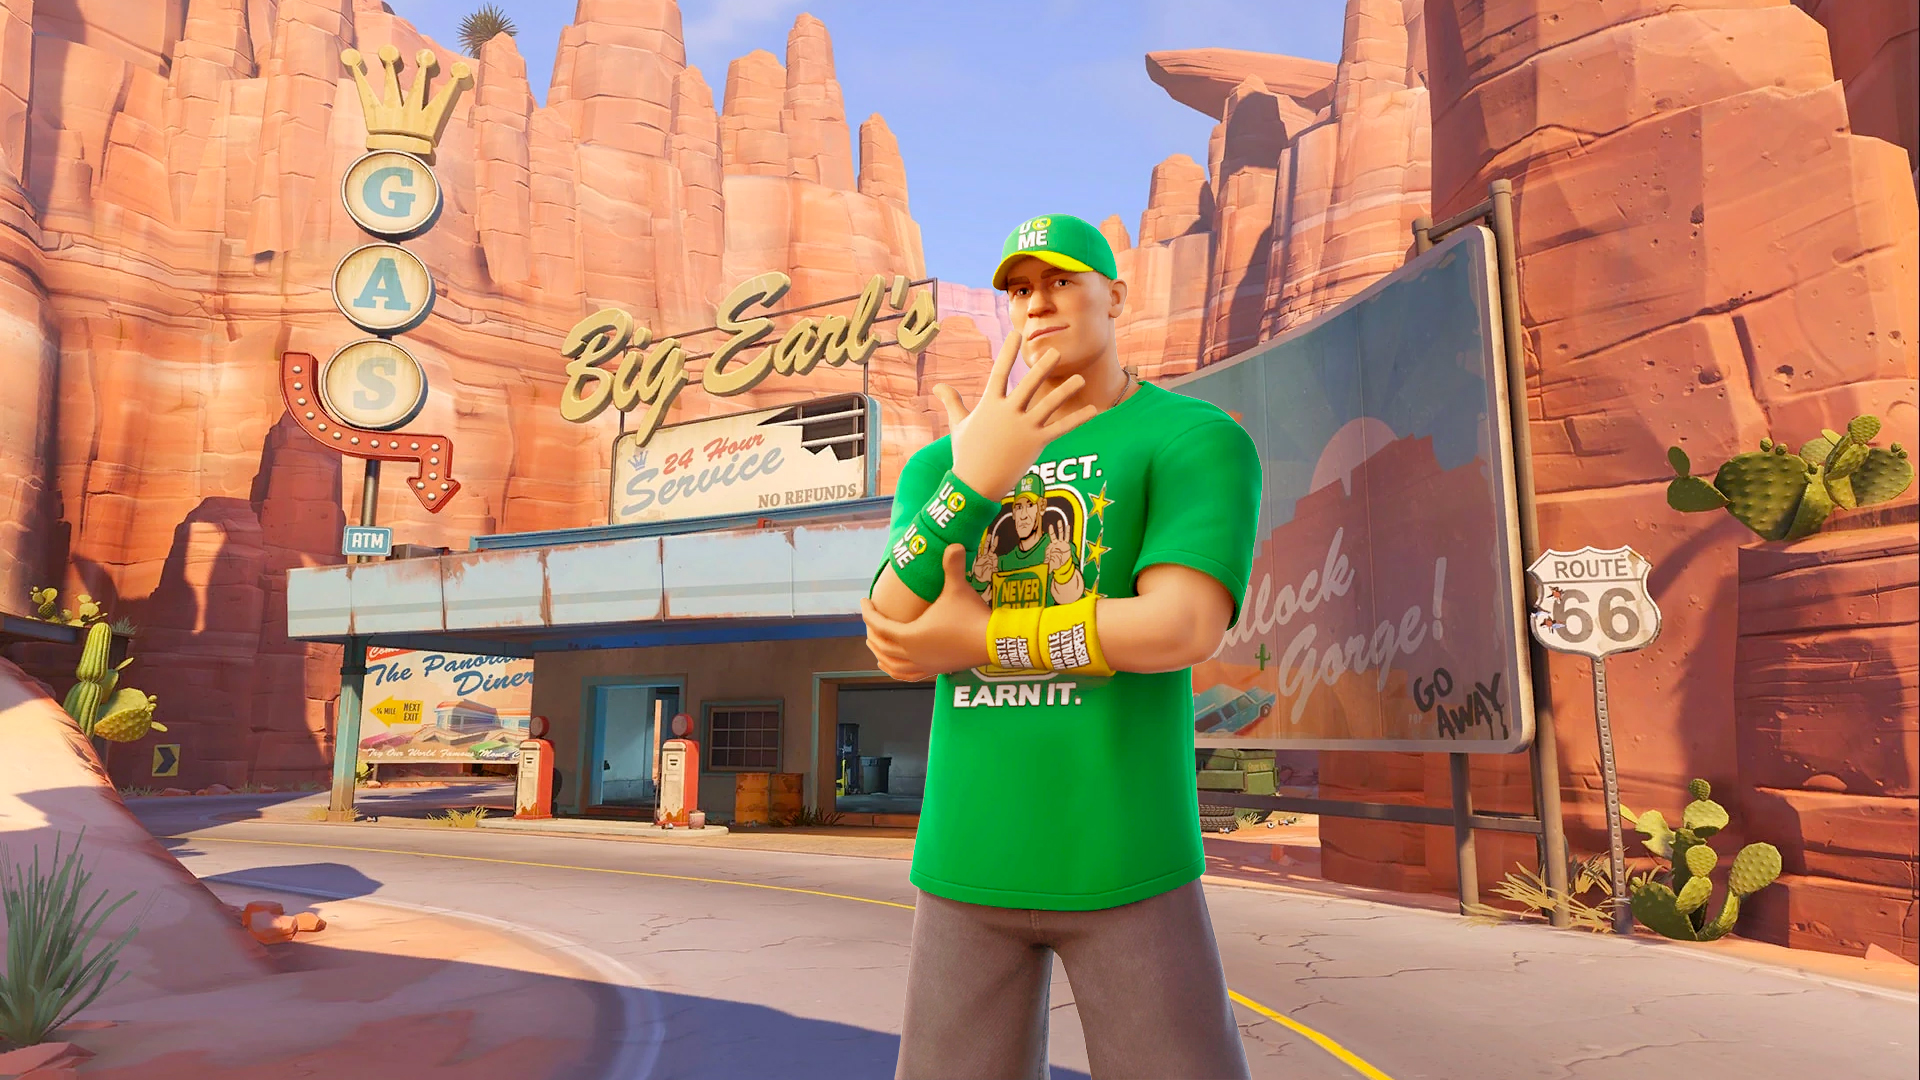 John Cena’s Fortnite model in the “U can’t see me” pose with the Route 66 map from Overwatch as background